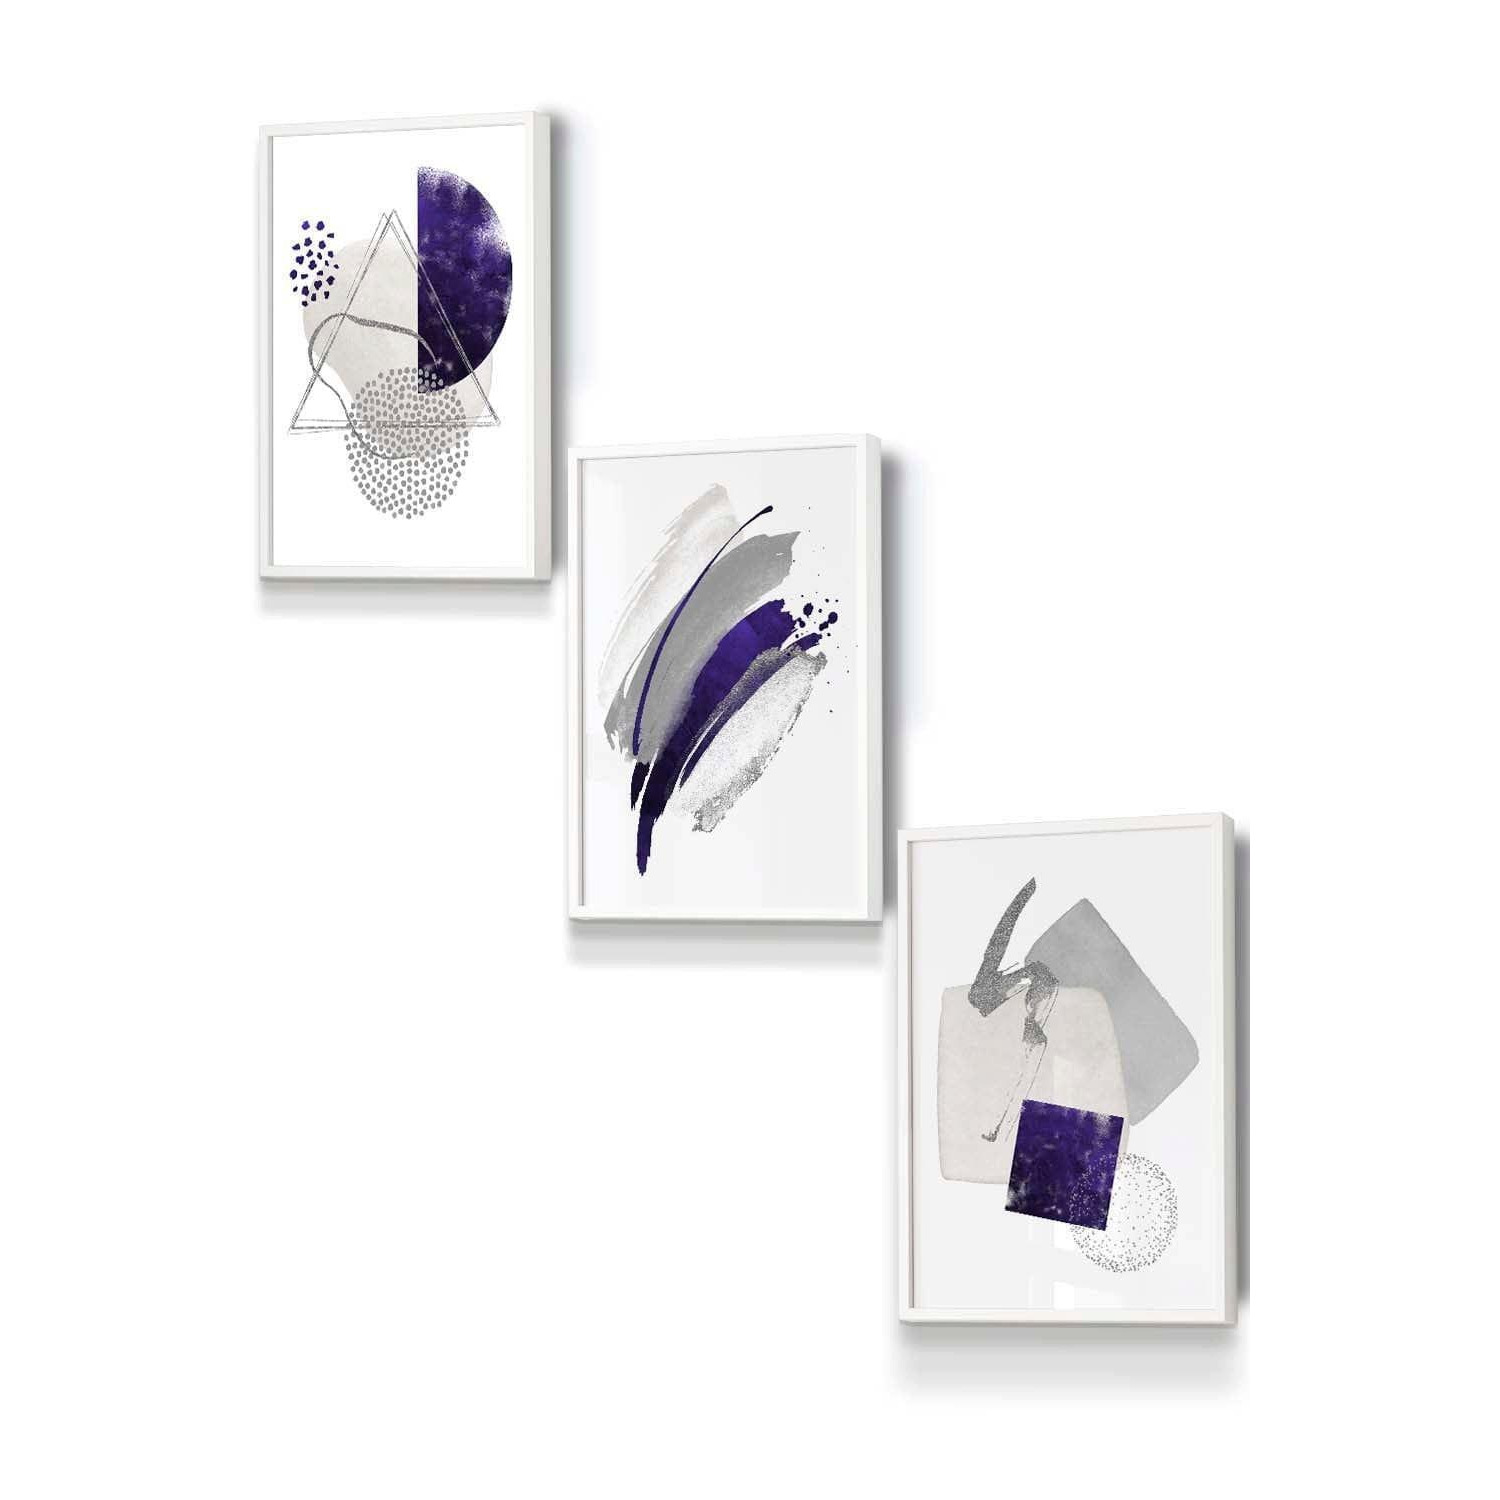 Set of 3 White Framed Abstract Purple Silver Watercolour Shapes Wall Art - image 1